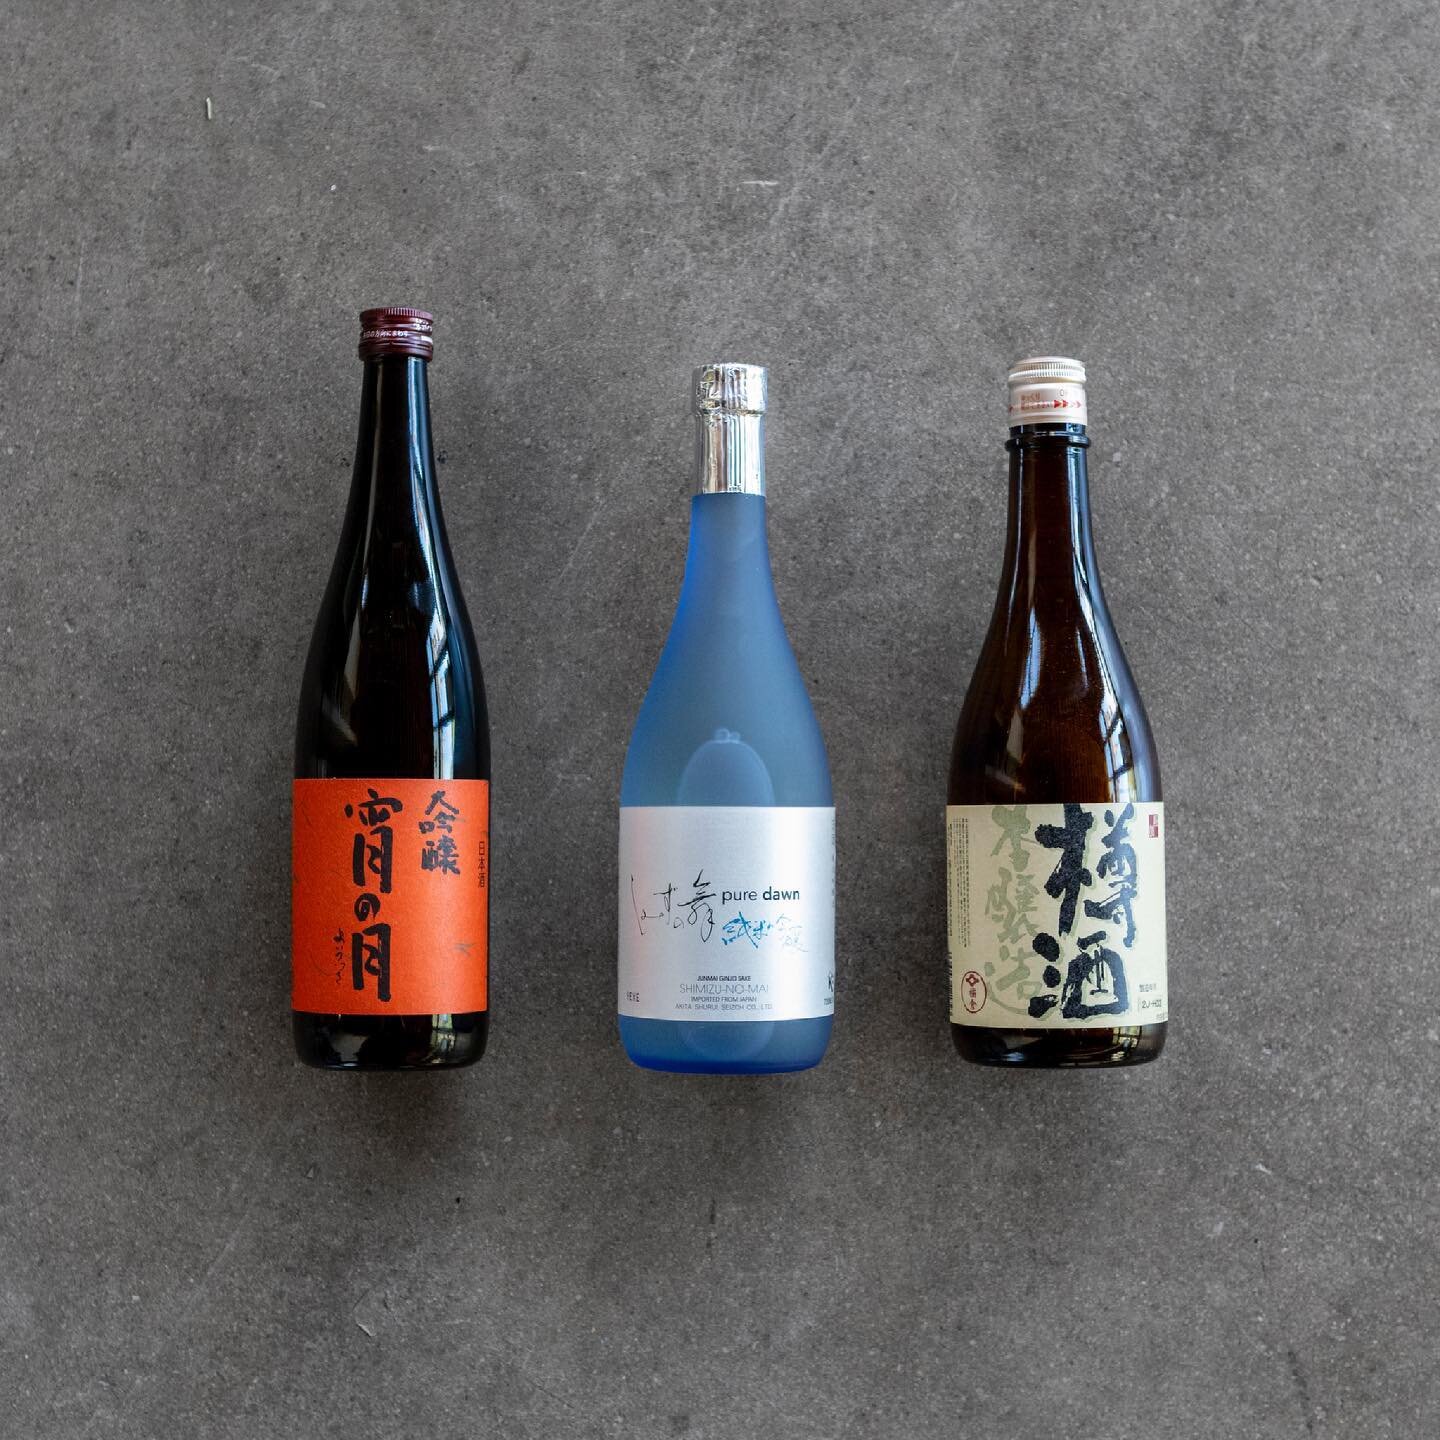 We have some wonderful, carefully curated sakes in the shop! Stop by to explore our selection of sake and more.